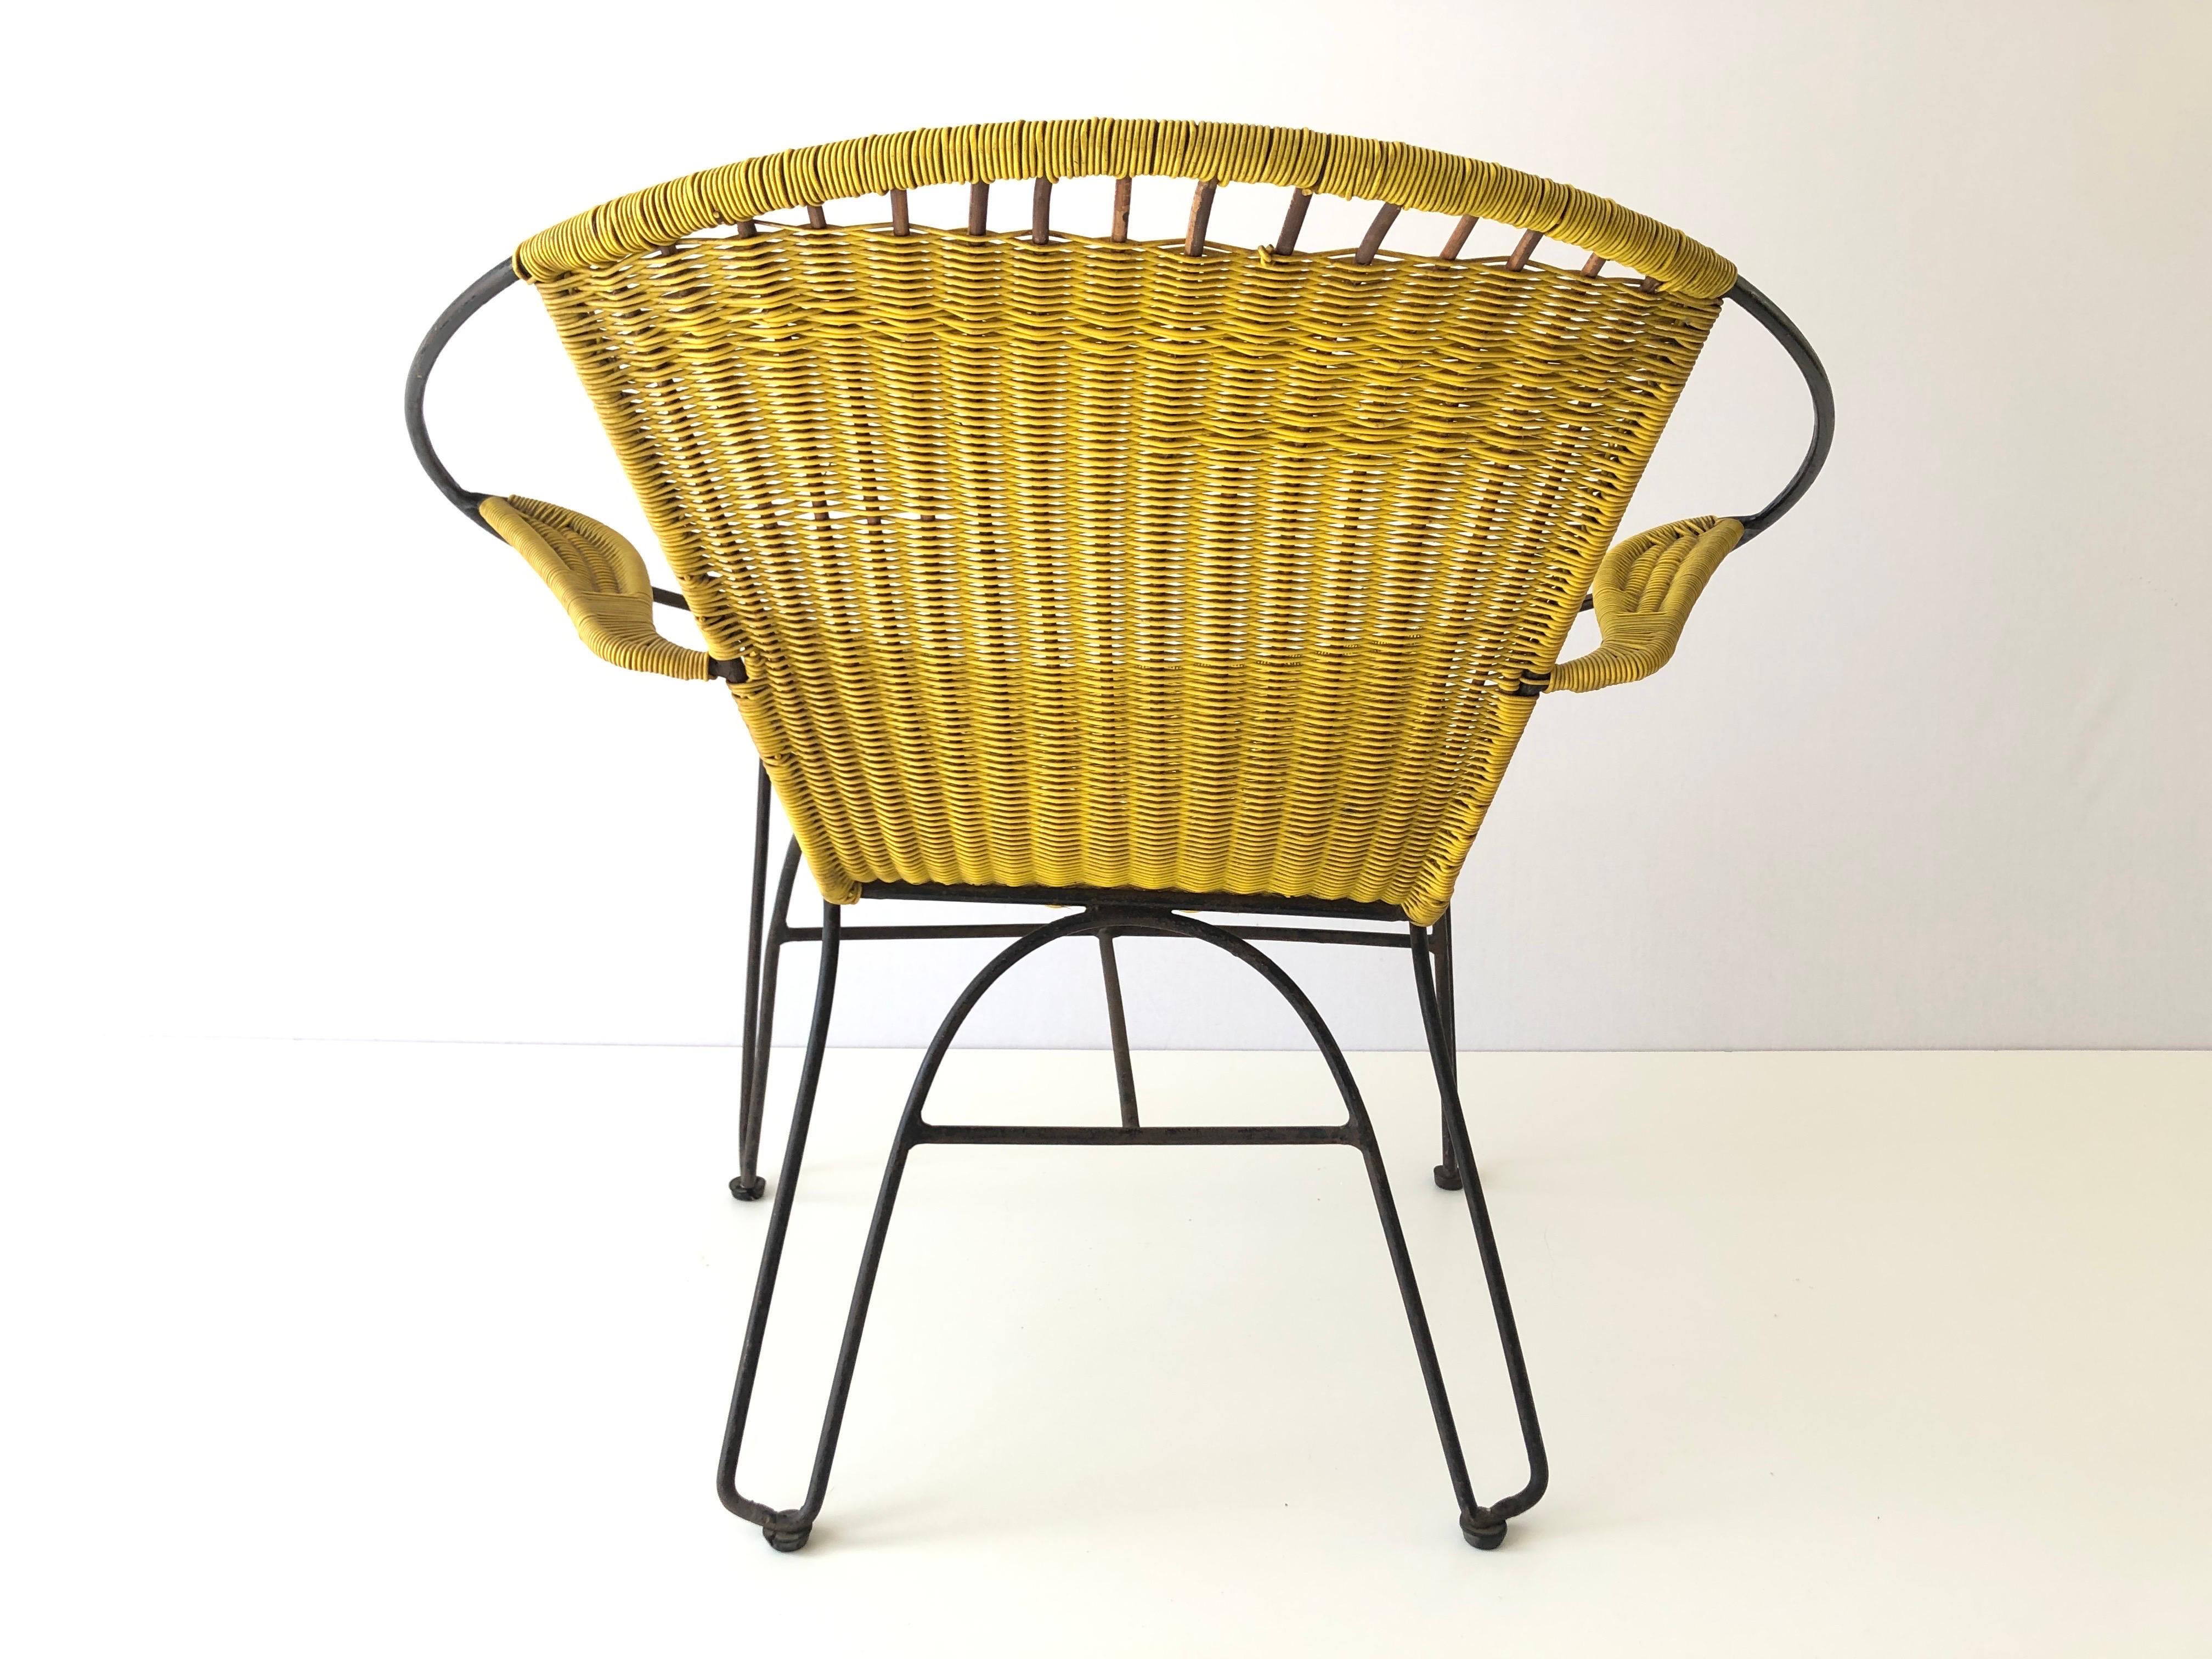 Metal Iconic Italian Yellow Spaghetti Circle Design Relax Chair, 1970s, Italy For Sale